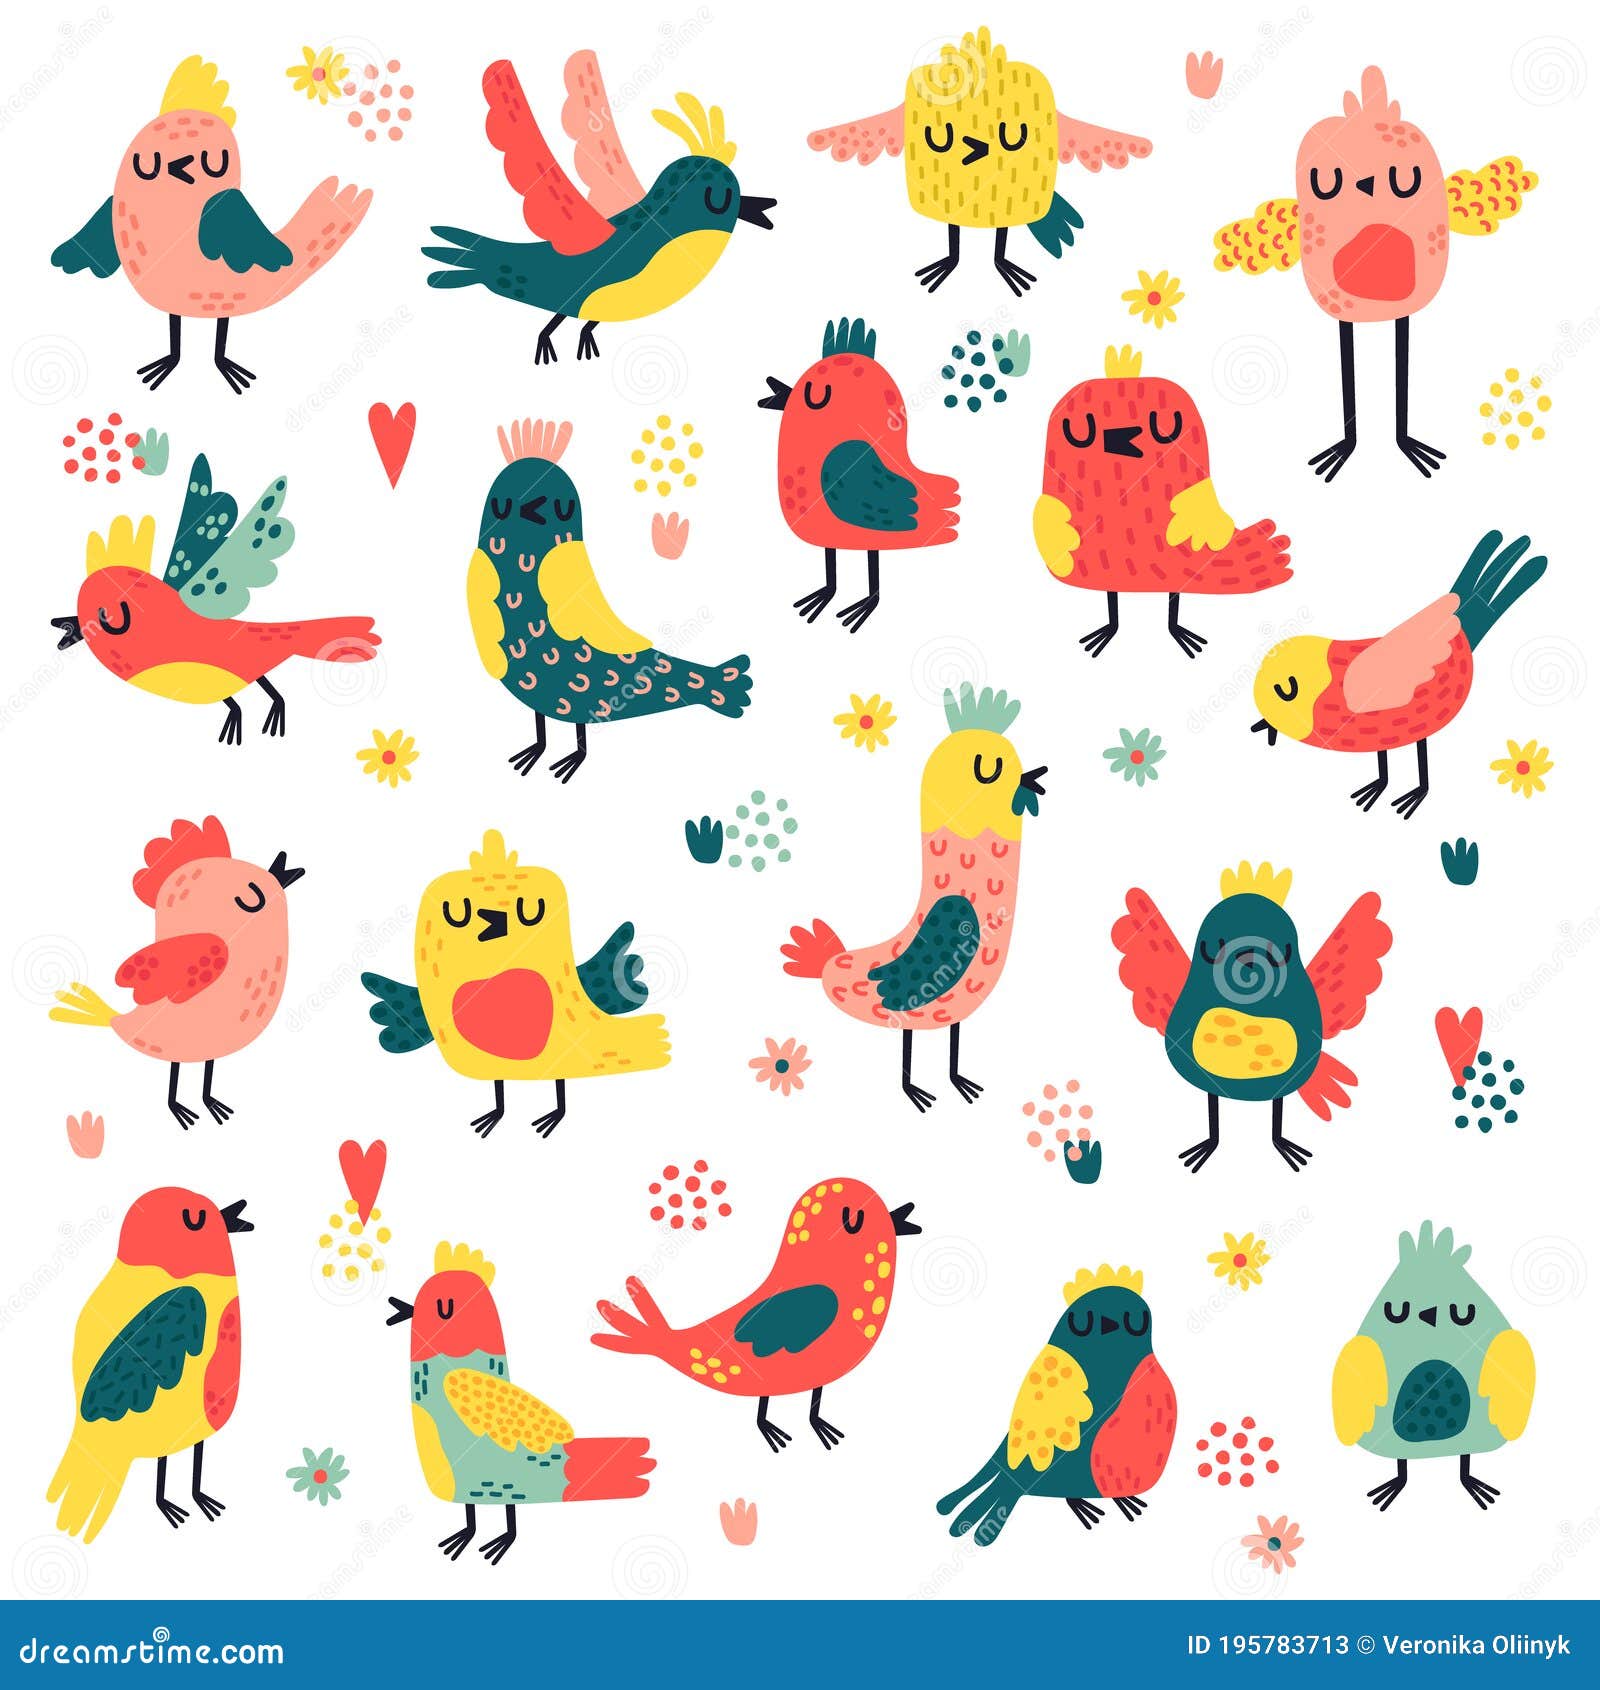 doodle birds. cute hand drawn birds, doodle colorful avifauna, lovely doves and sparrows, simple freehand birds 